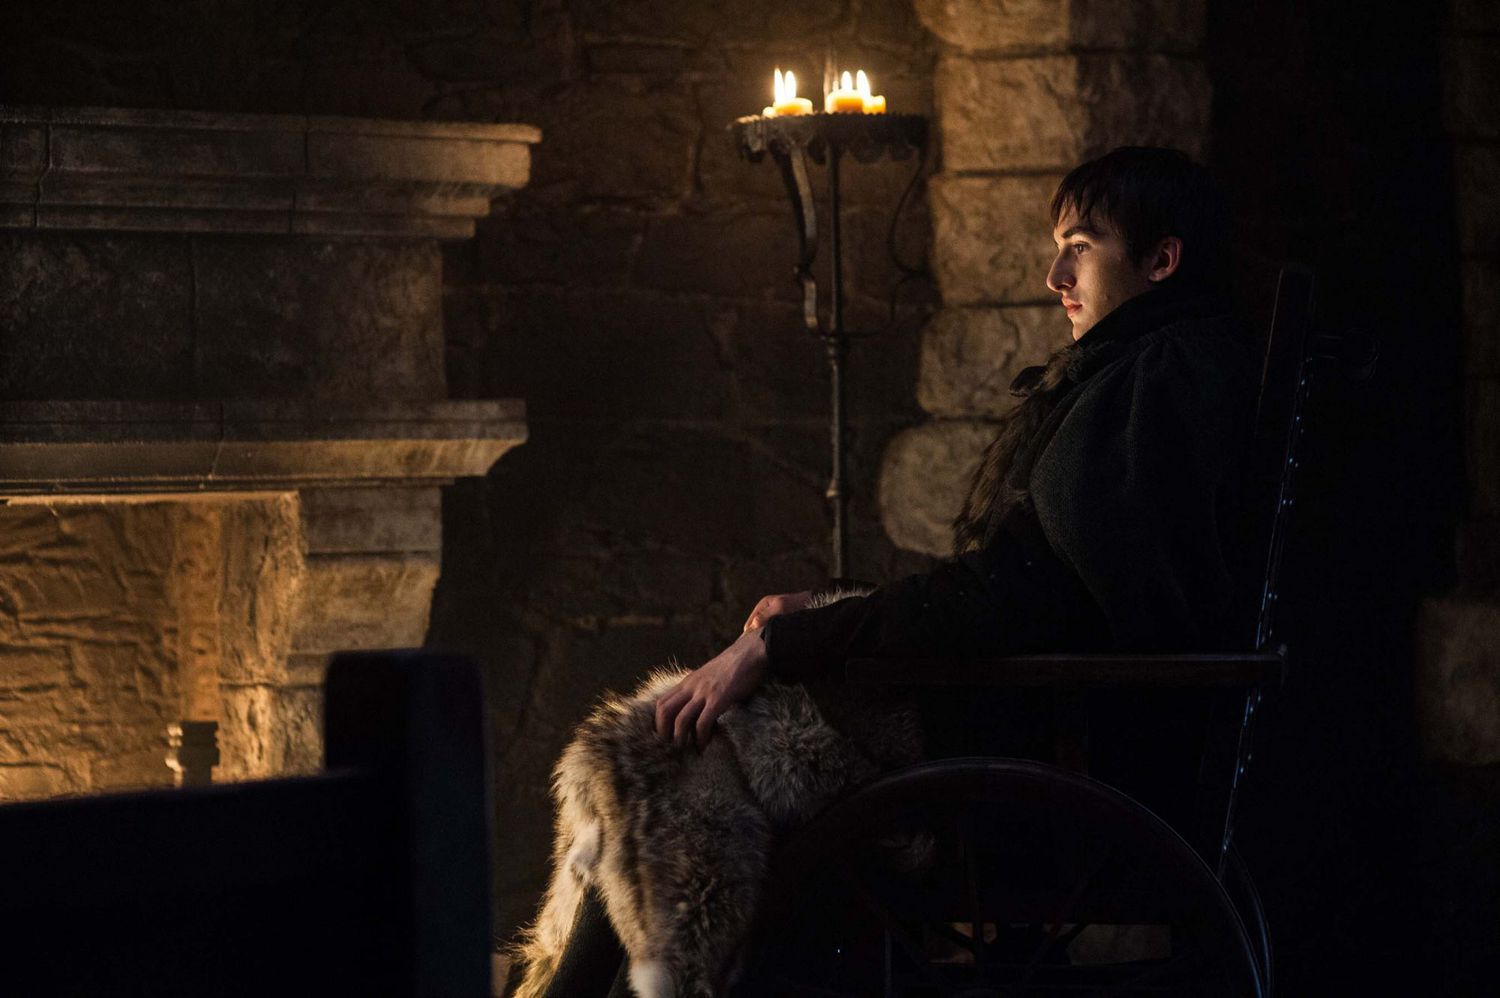 Bran Stark (Isaac Hempstead-Wright) sits by the fire, presumably at Winterfell